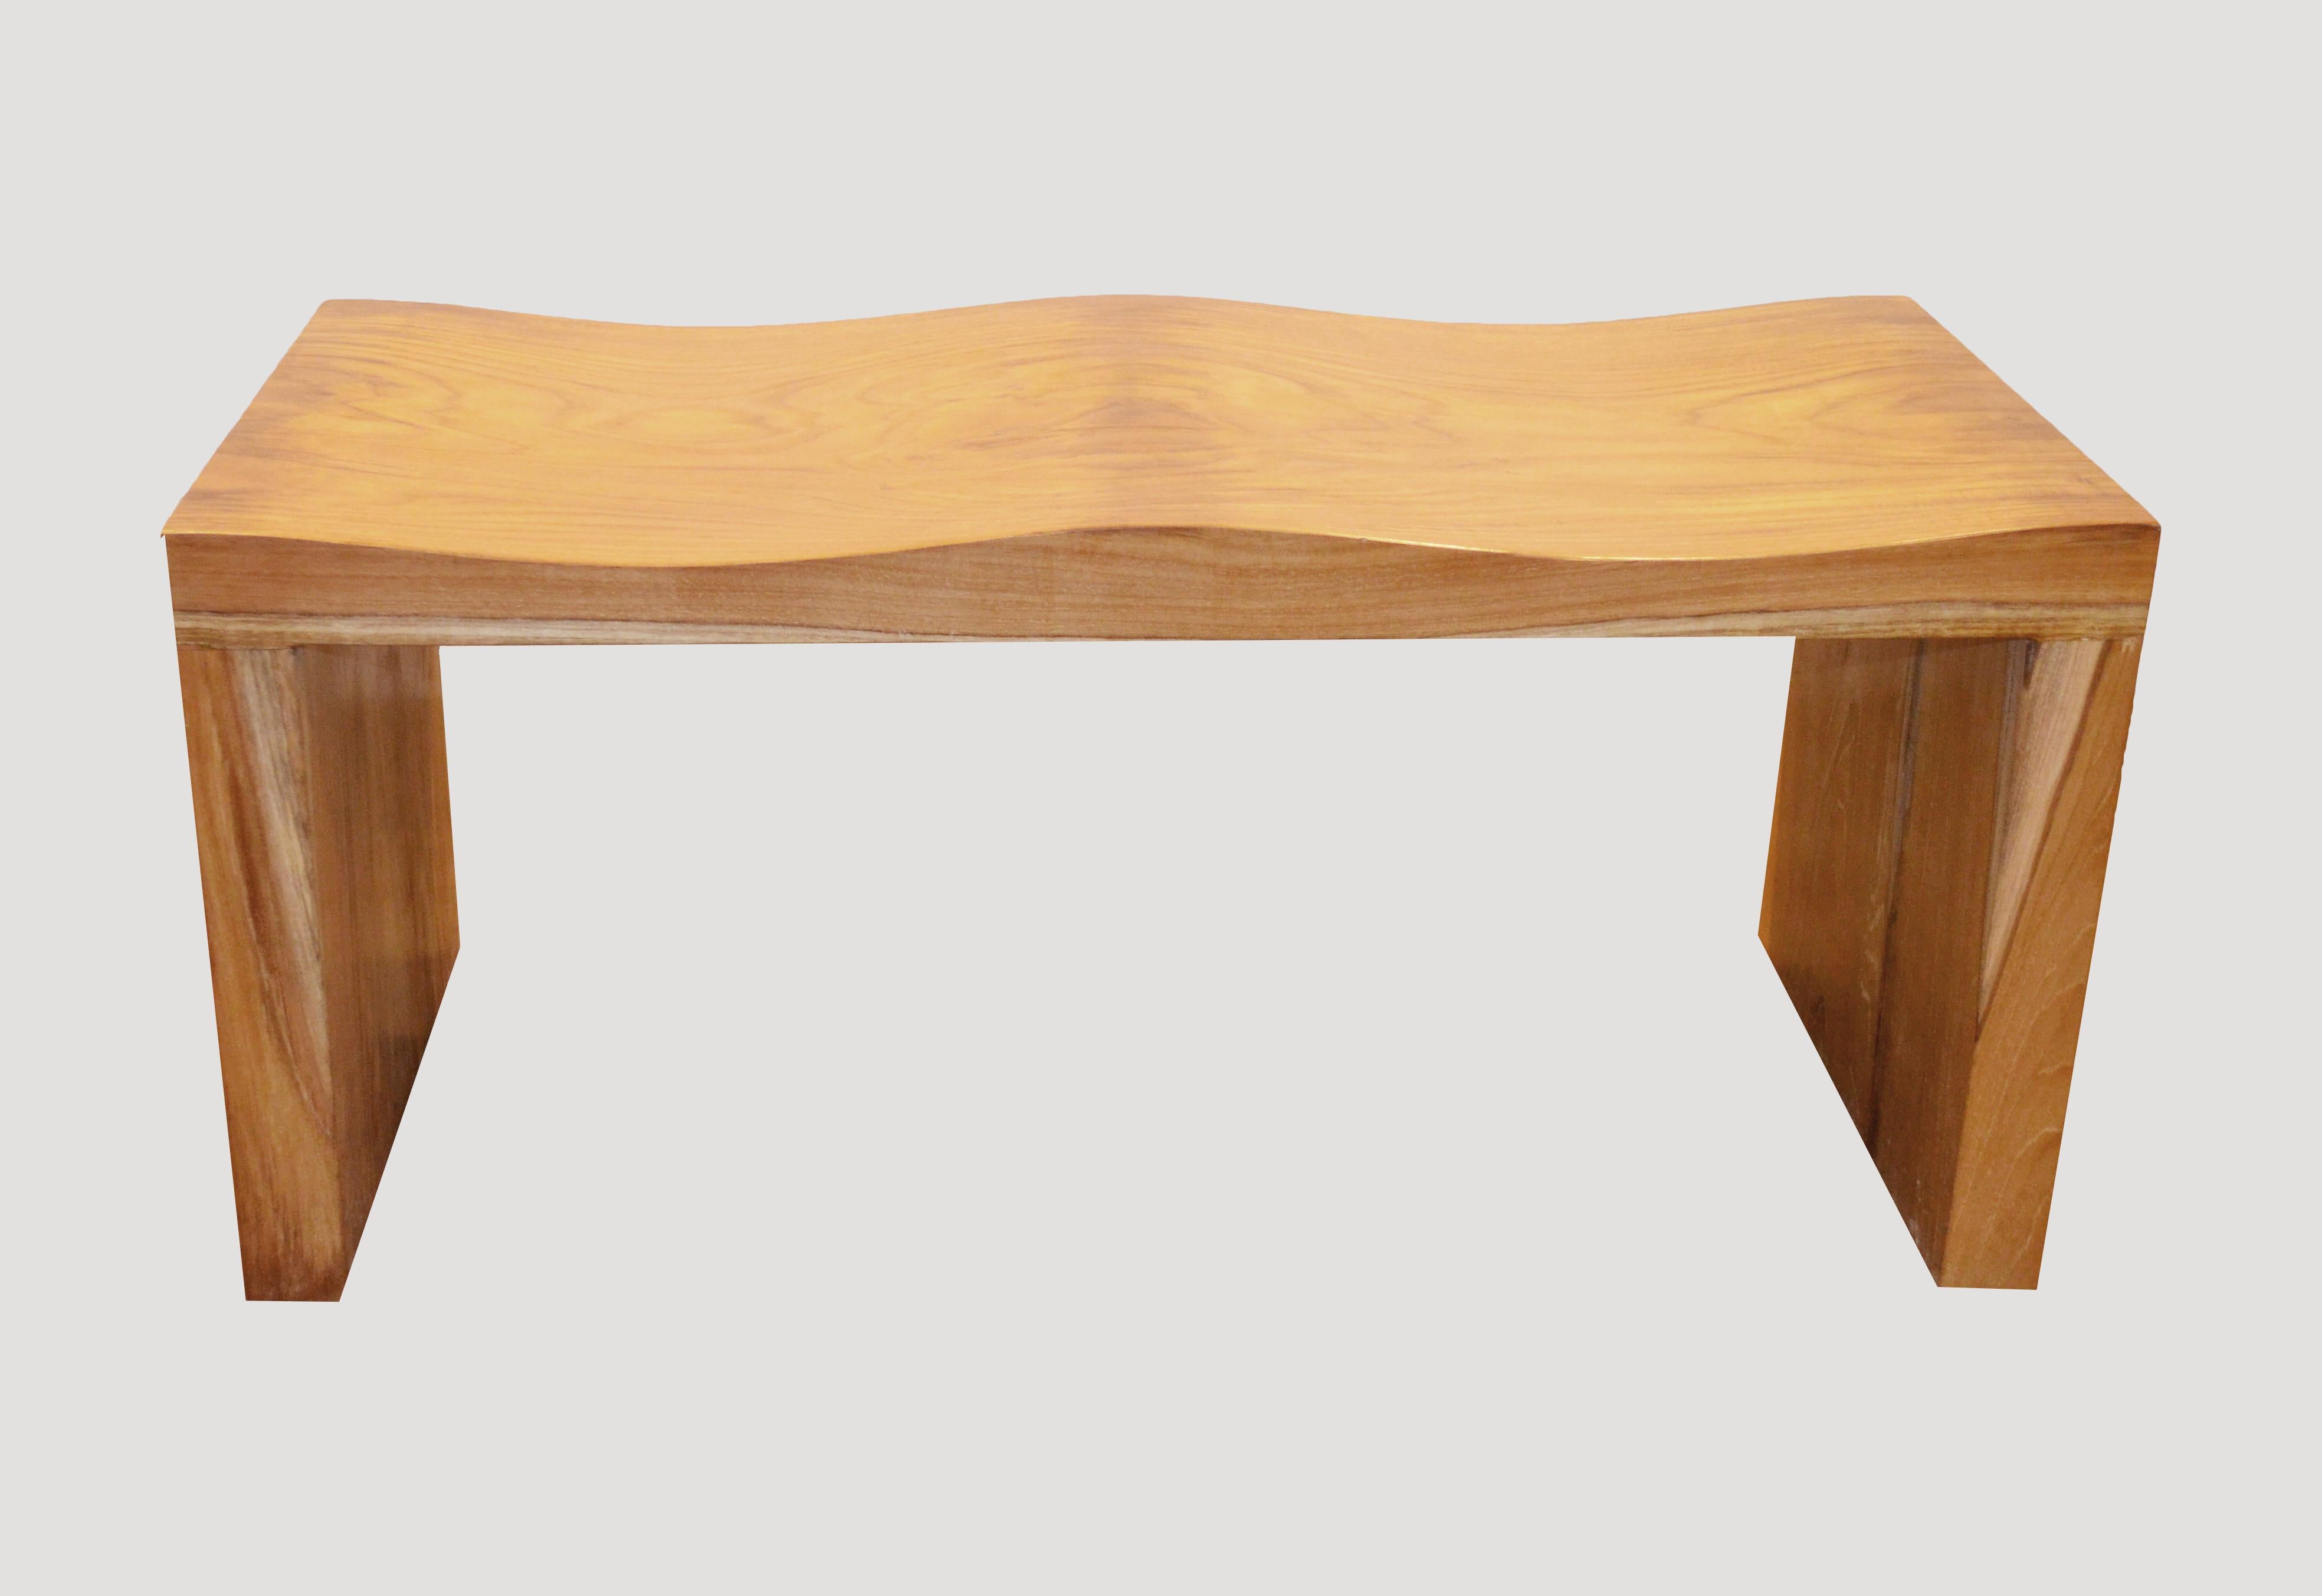 Andrianna Shamaris Natural Teak Wood Wave Bench In Excellent Condition For Sale In New York, NY